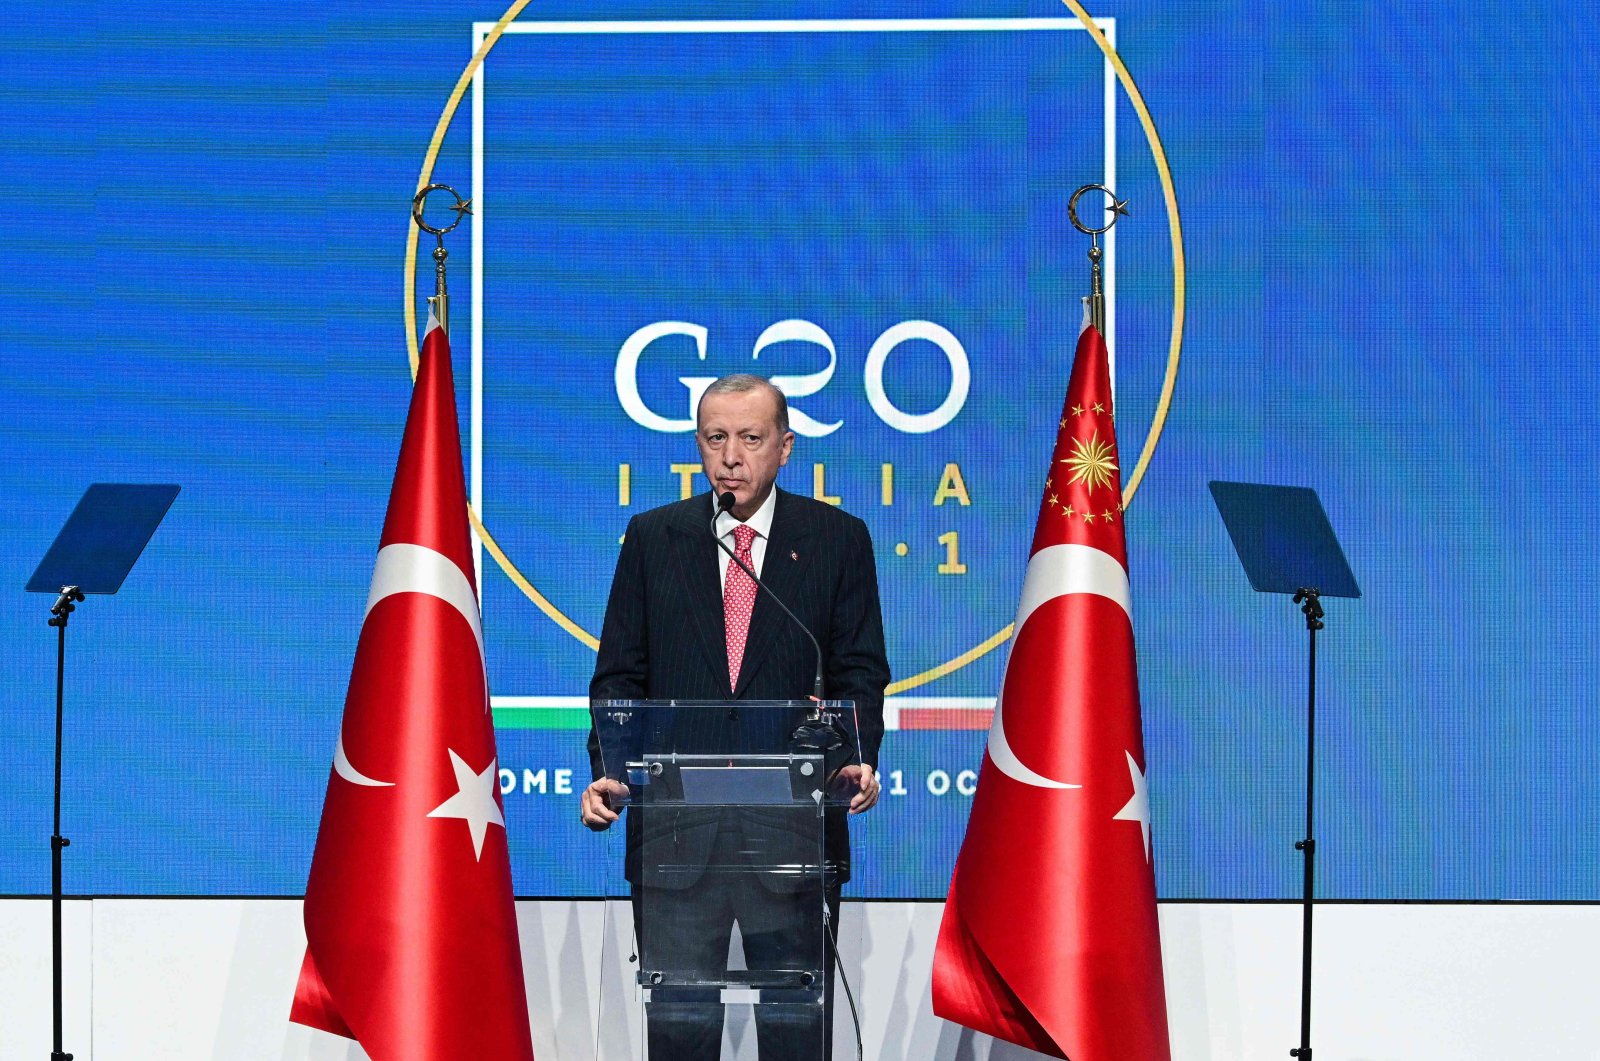 Turkish President Recep Tayyip Erdoğan addresses a press conference at the end of the G-20 summit, at the convention center La Nuvola, Rome, Italy, on Oct. 31, 2021. (AFP Photo)